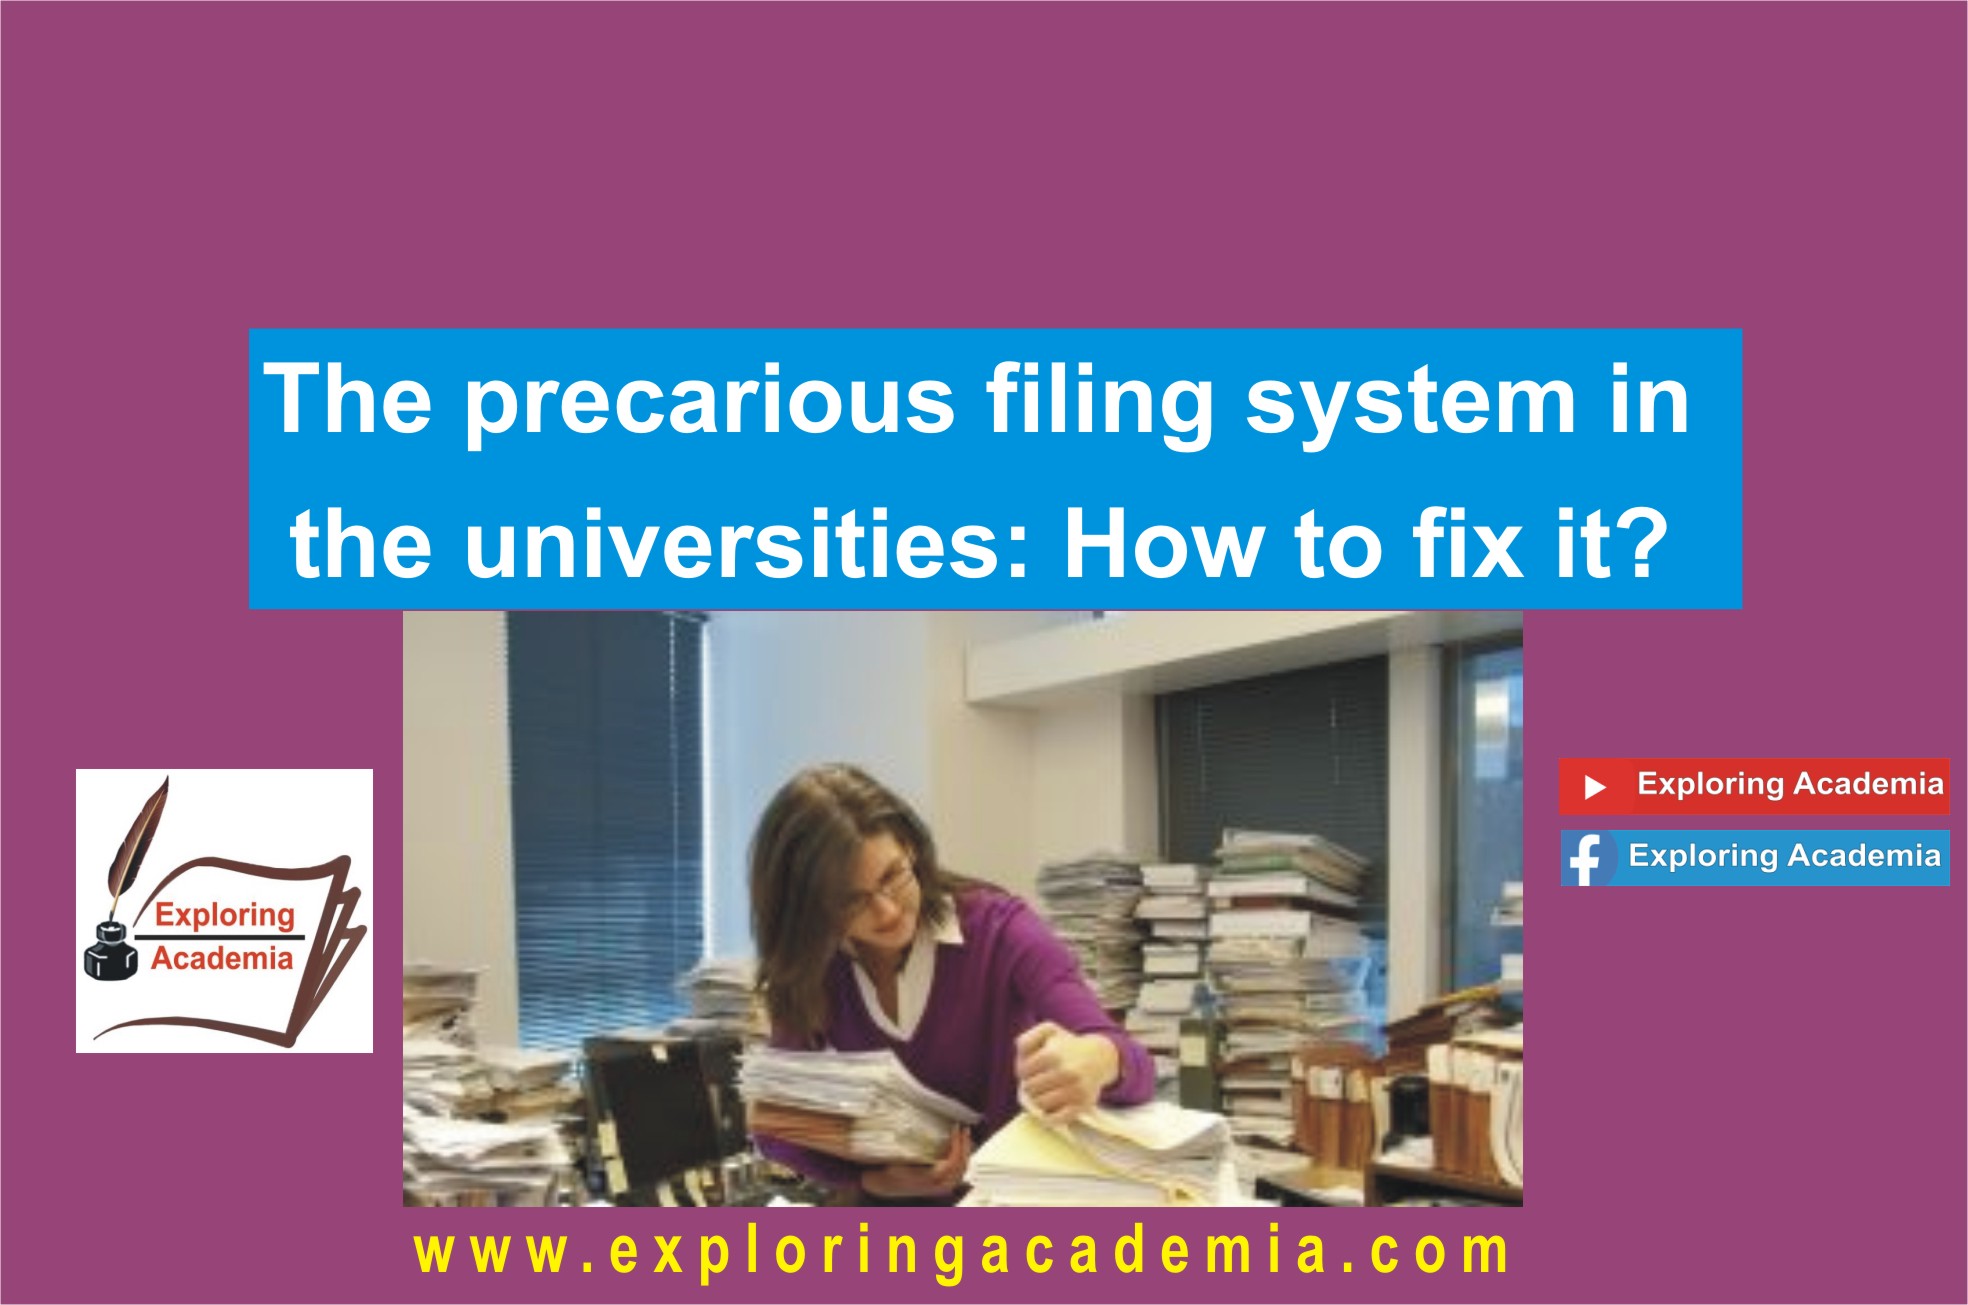 The precarious filing system in the universities: How to fix it?